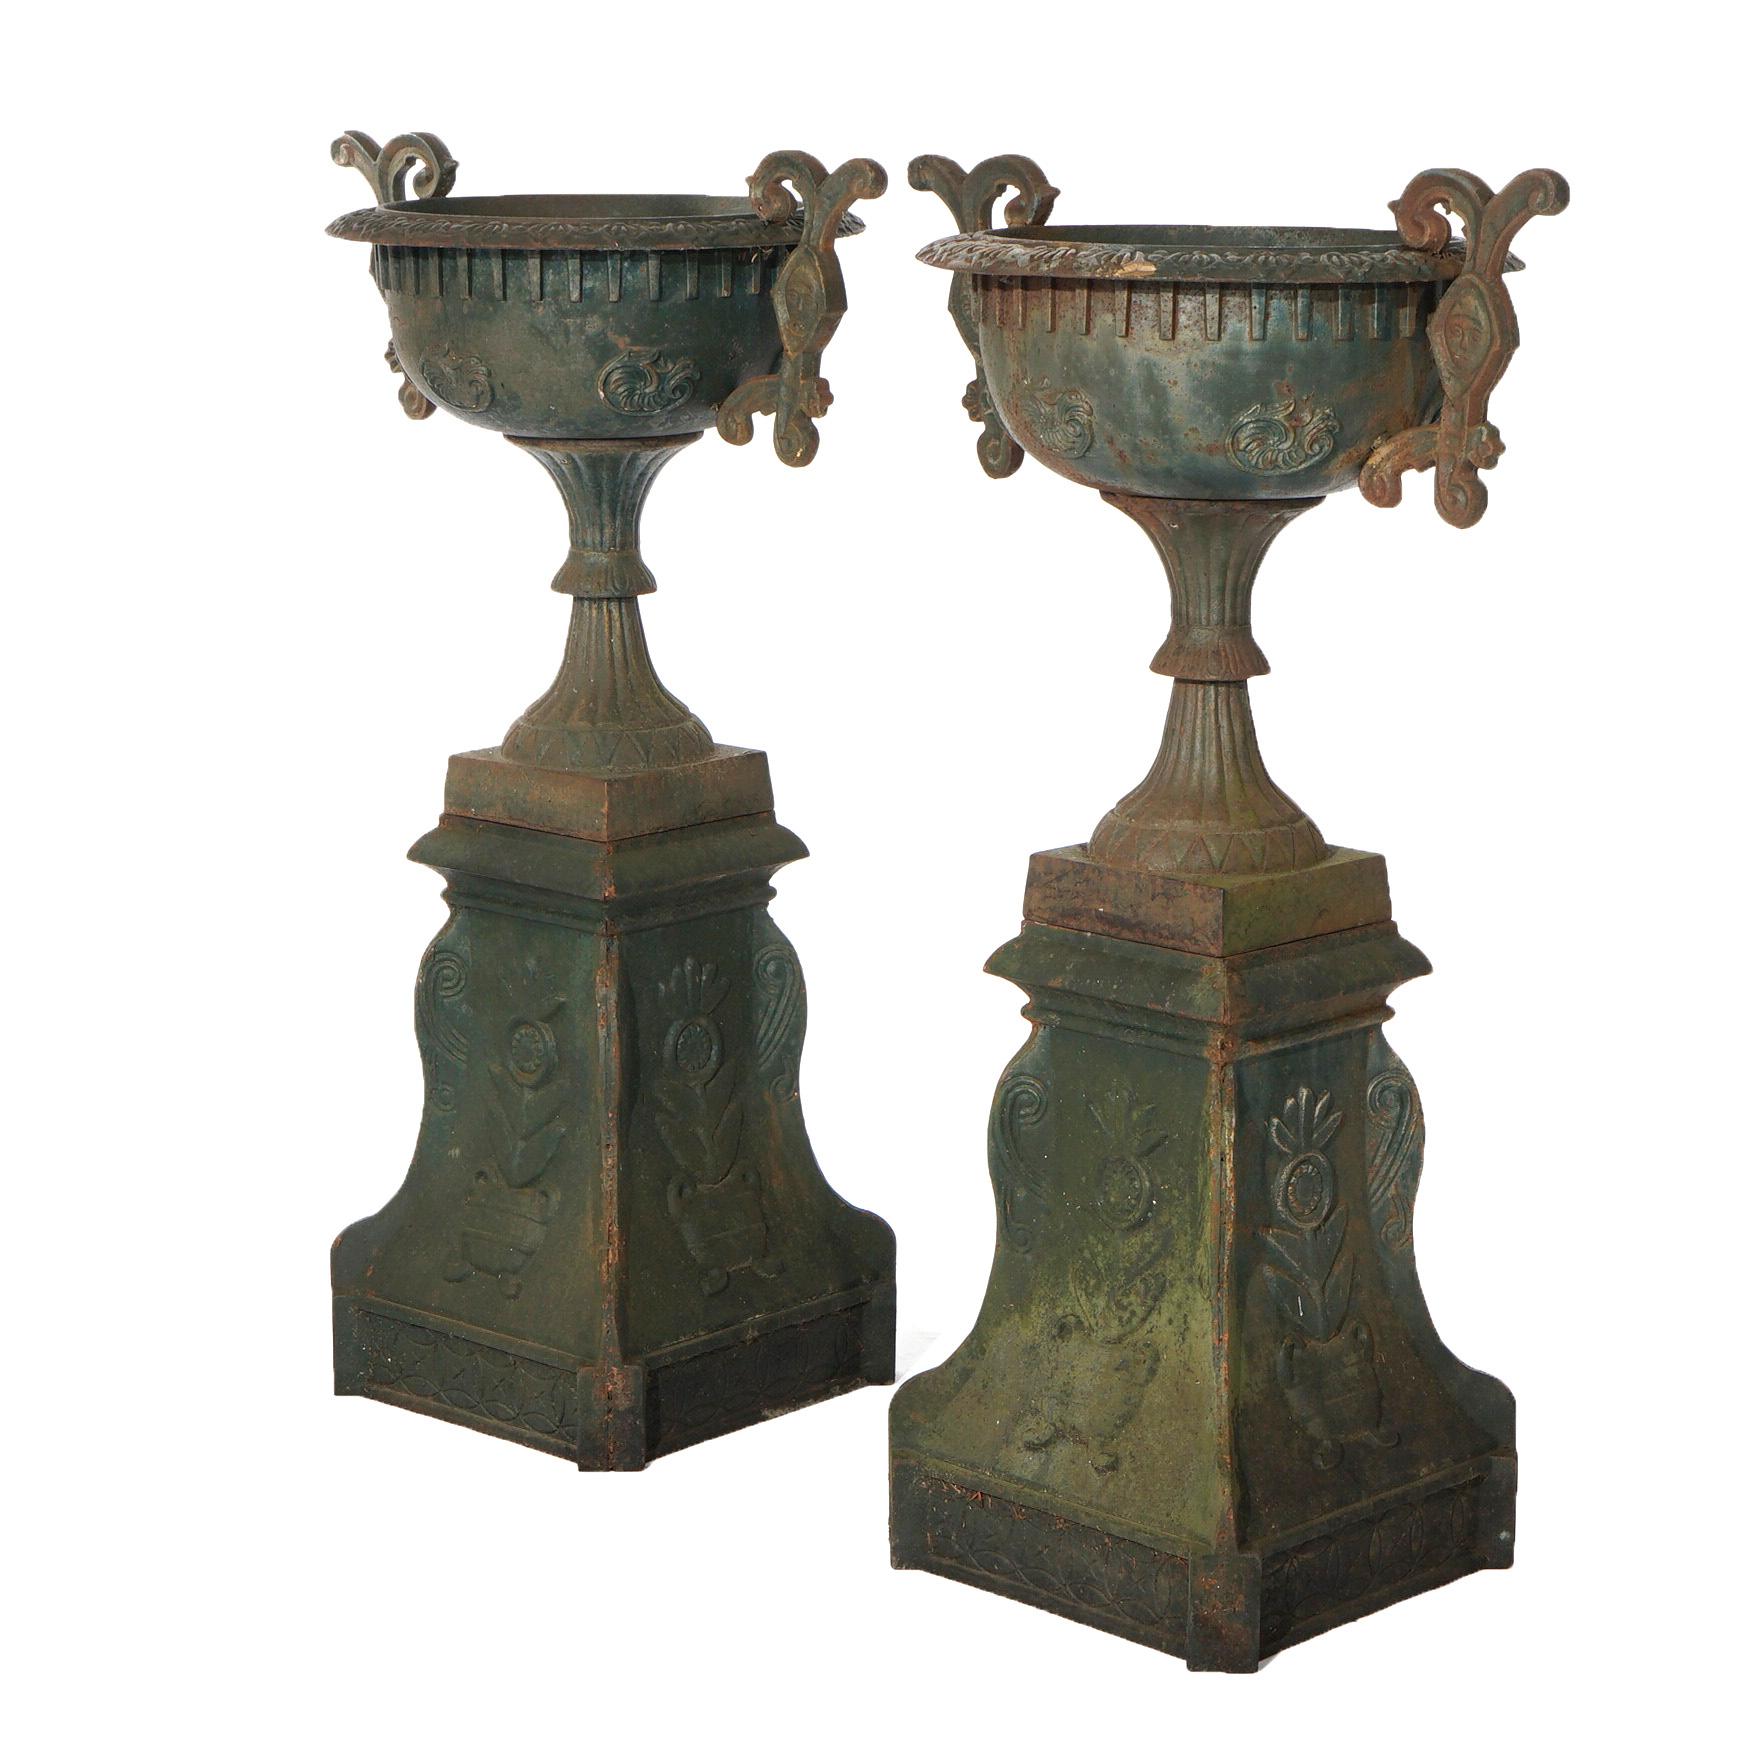 20th Century Pair Cast Iron Handled Grecian Urns on Floral Embossed Plinths 20th C